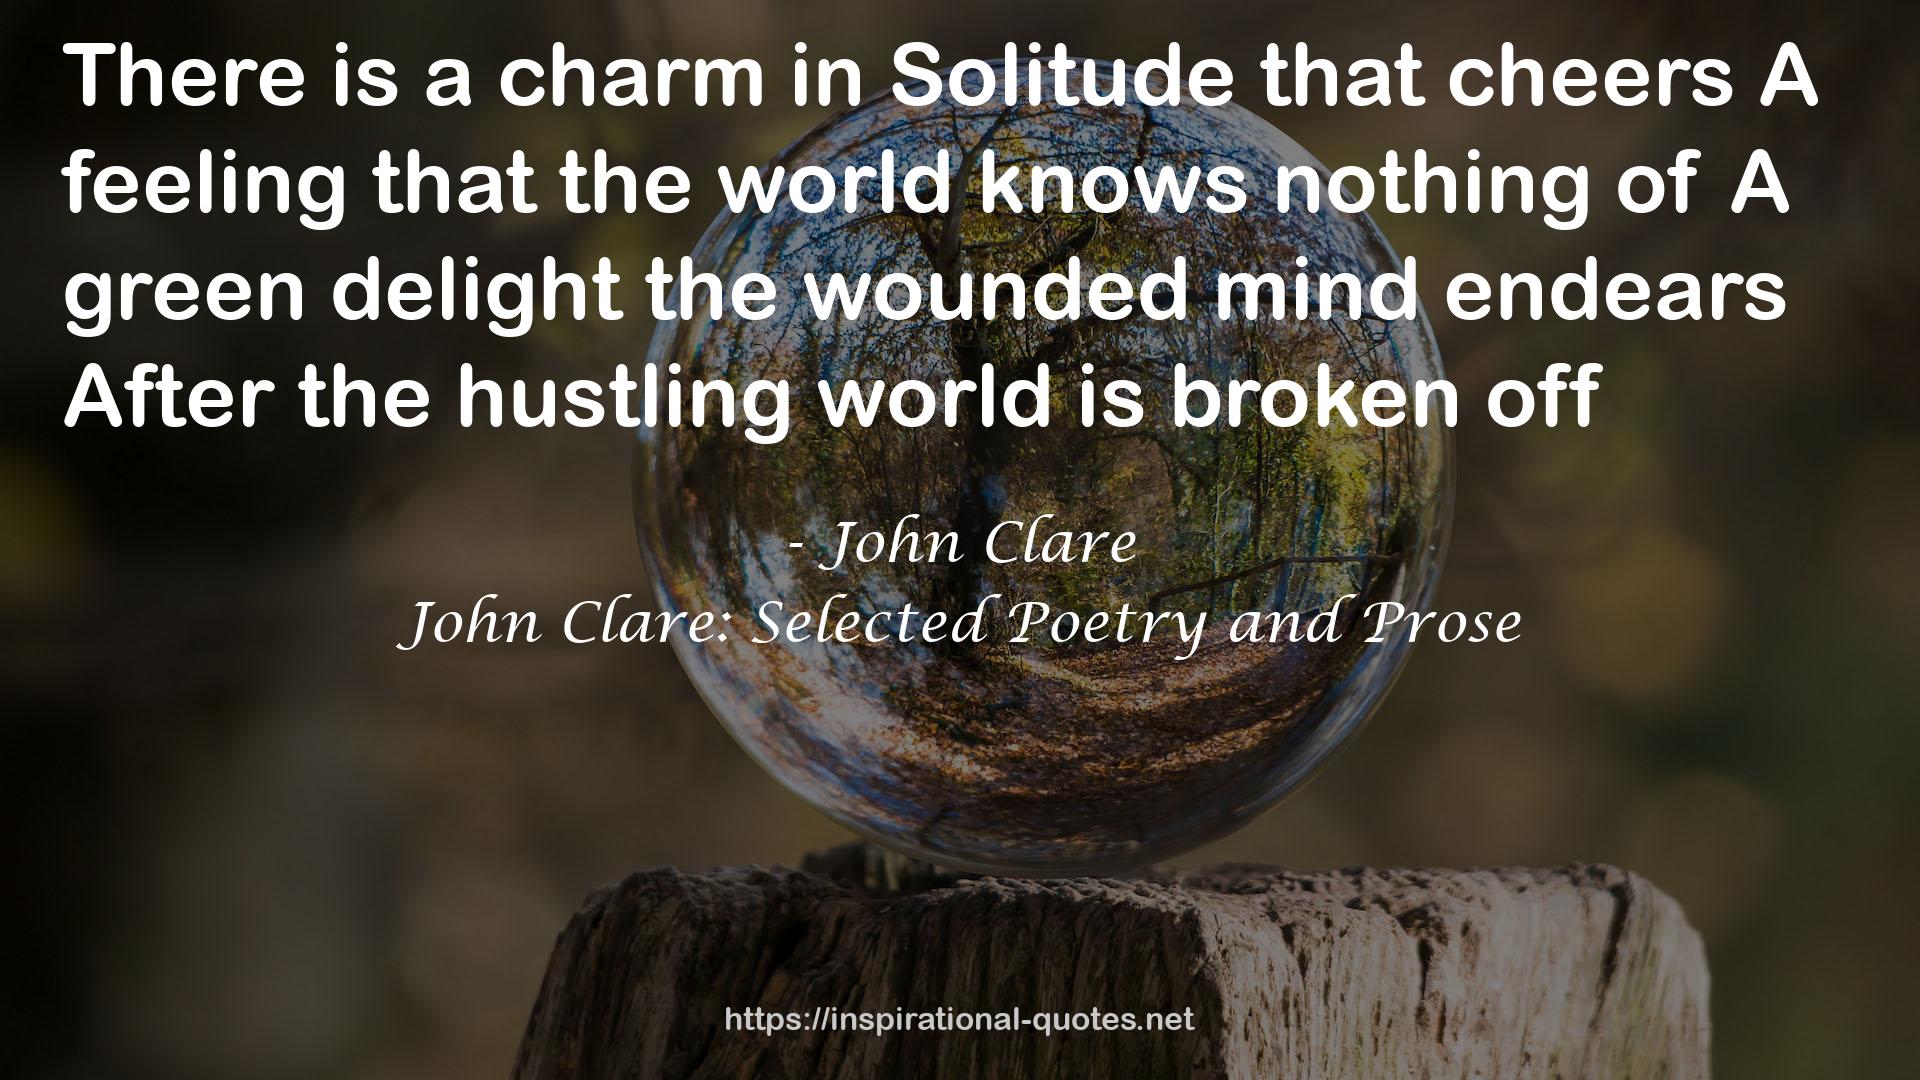 John Clare: Selected Poetry and Prose QUOTES